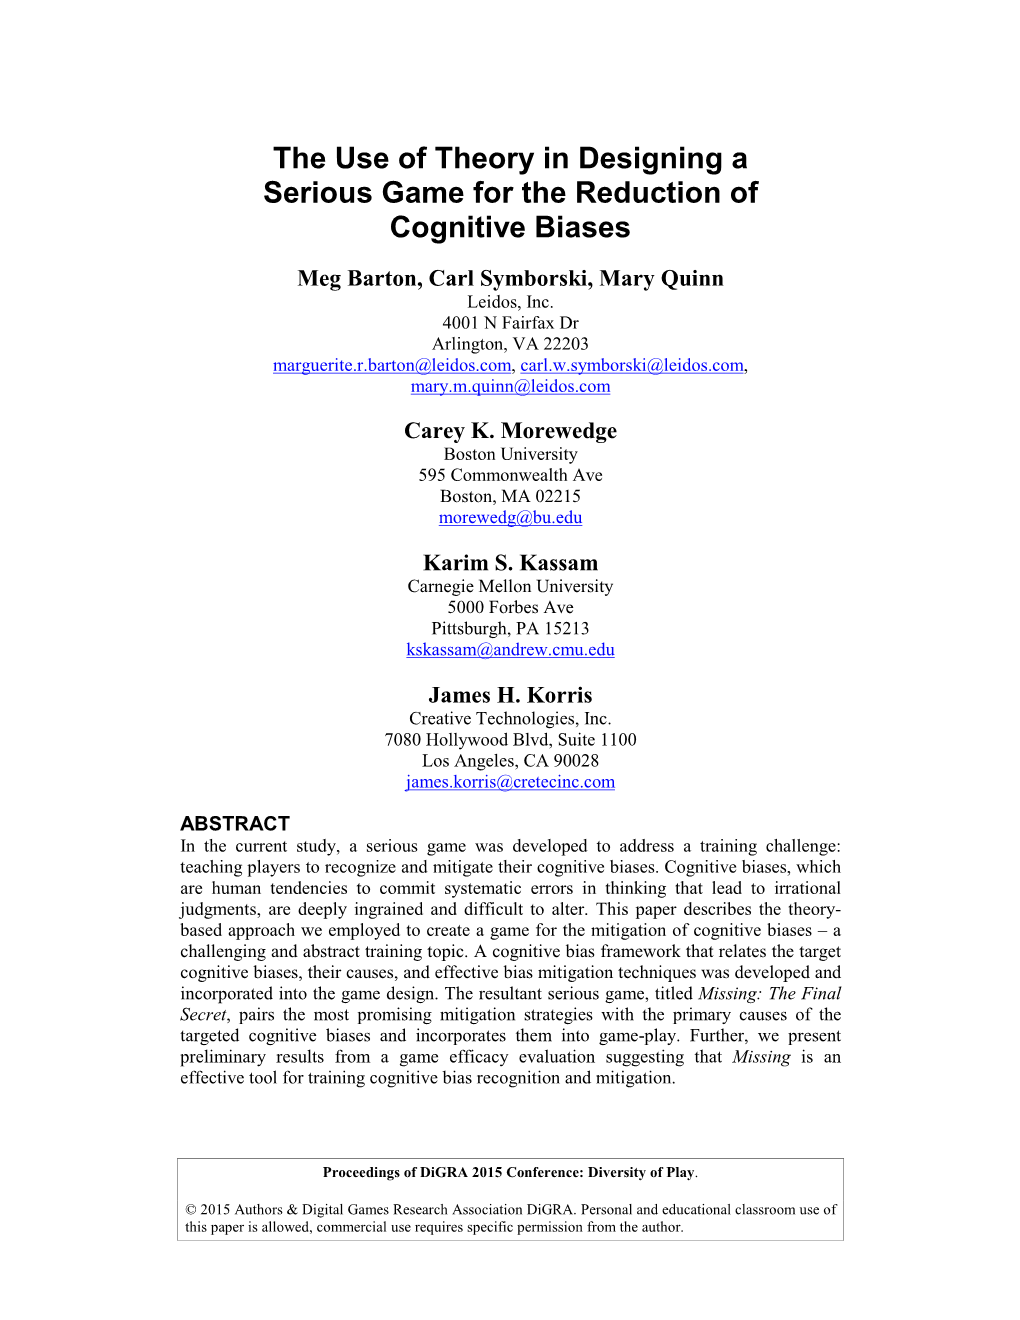 The Use of Theory in Designing a Serious Game for the Reduction of Cognitive Biases Meg Barton, Carl Symborski, Mary Quinn Leidos, Inc